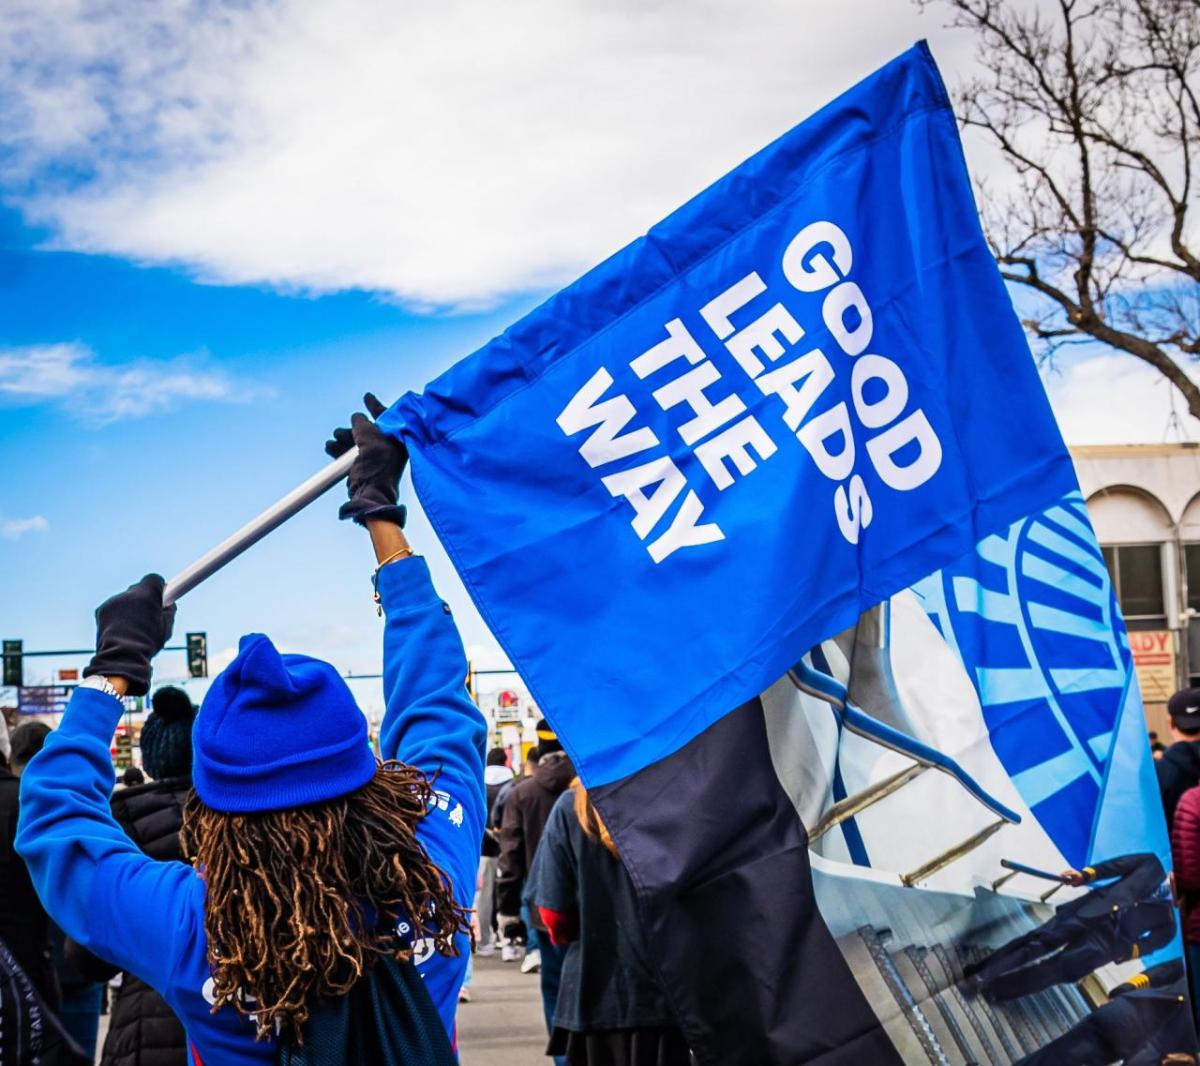 Person wearing blue holds a blue flag with the words, "good leads the way" printed in white on the flag